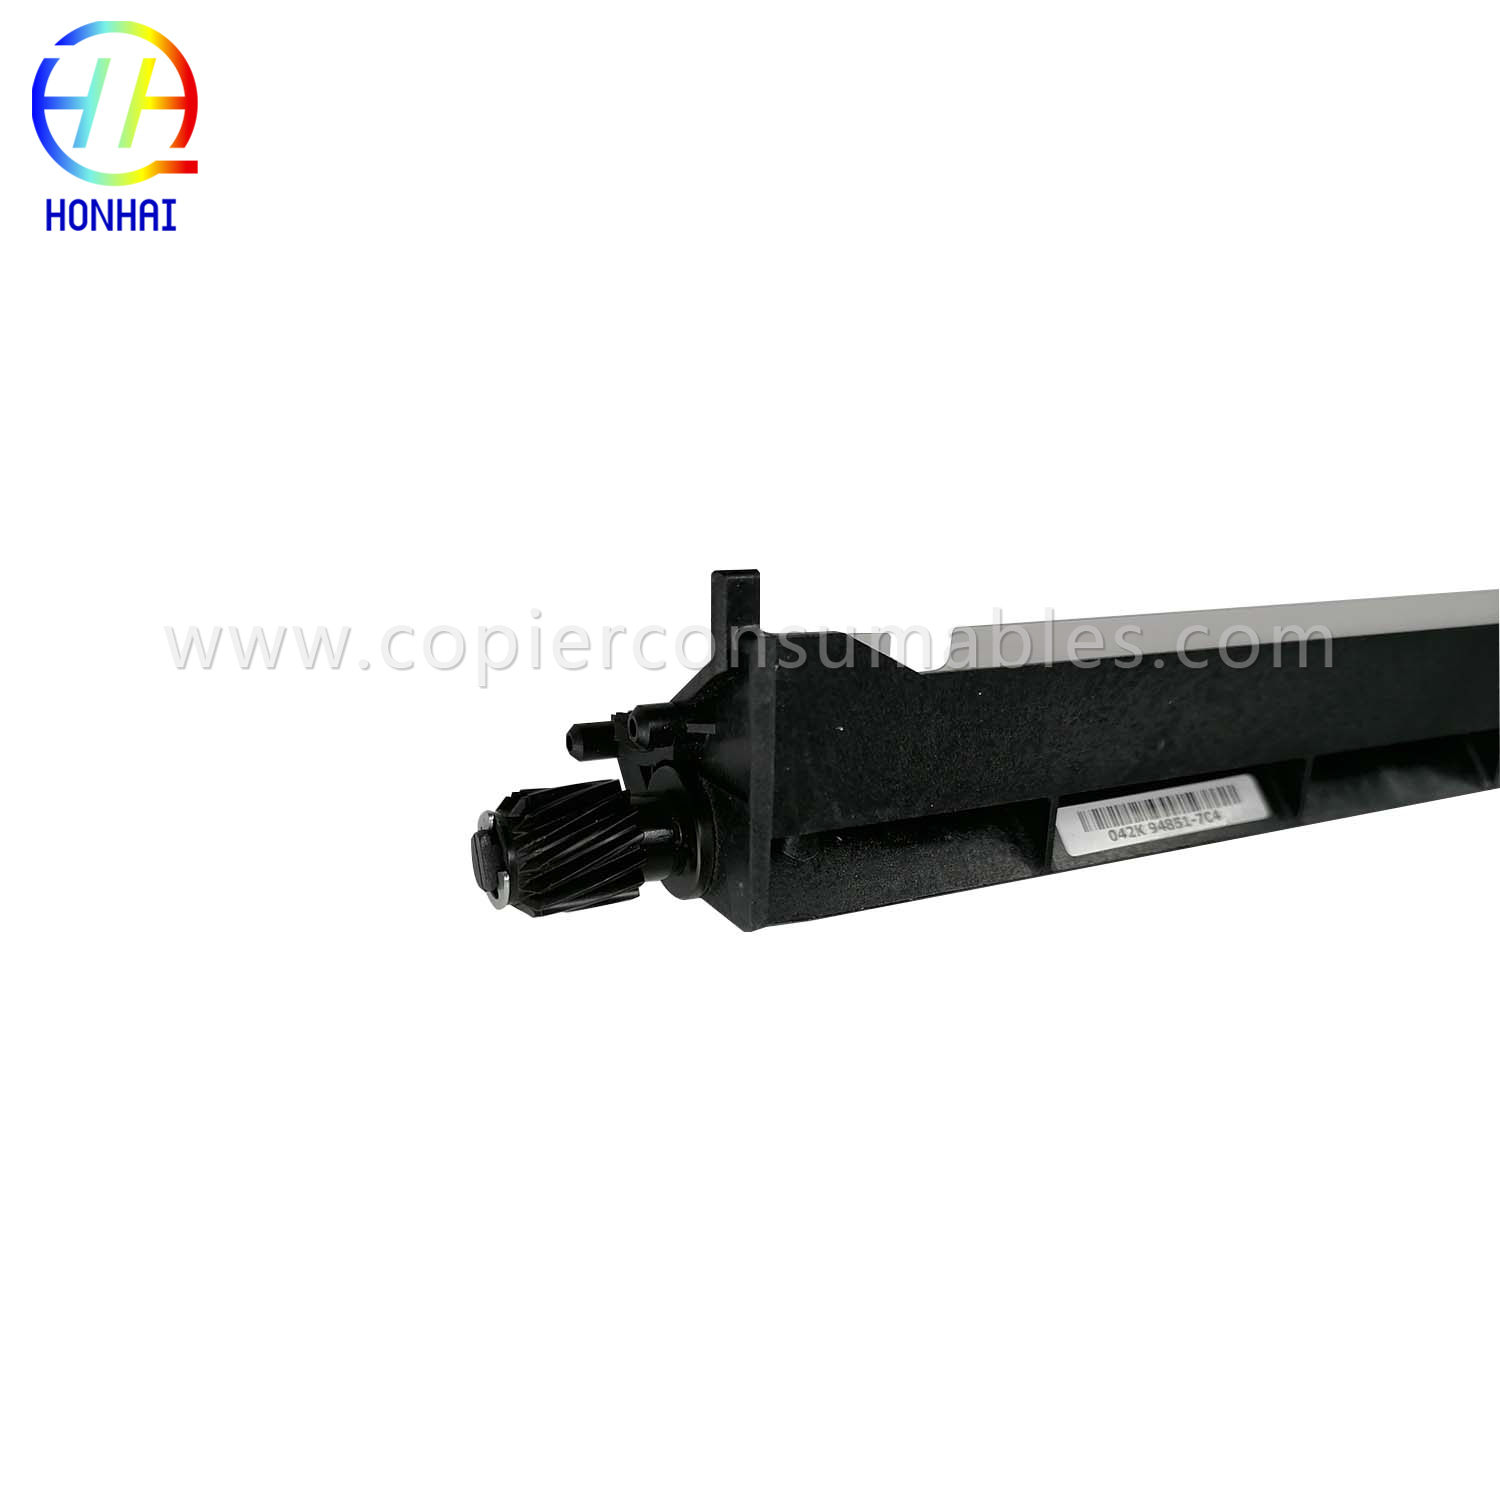 Transfer Belt Cleaning Assembly for Xerox C2270 C2275 C3370 C3371 C3373 C3375 042K94851(7) 拷贝